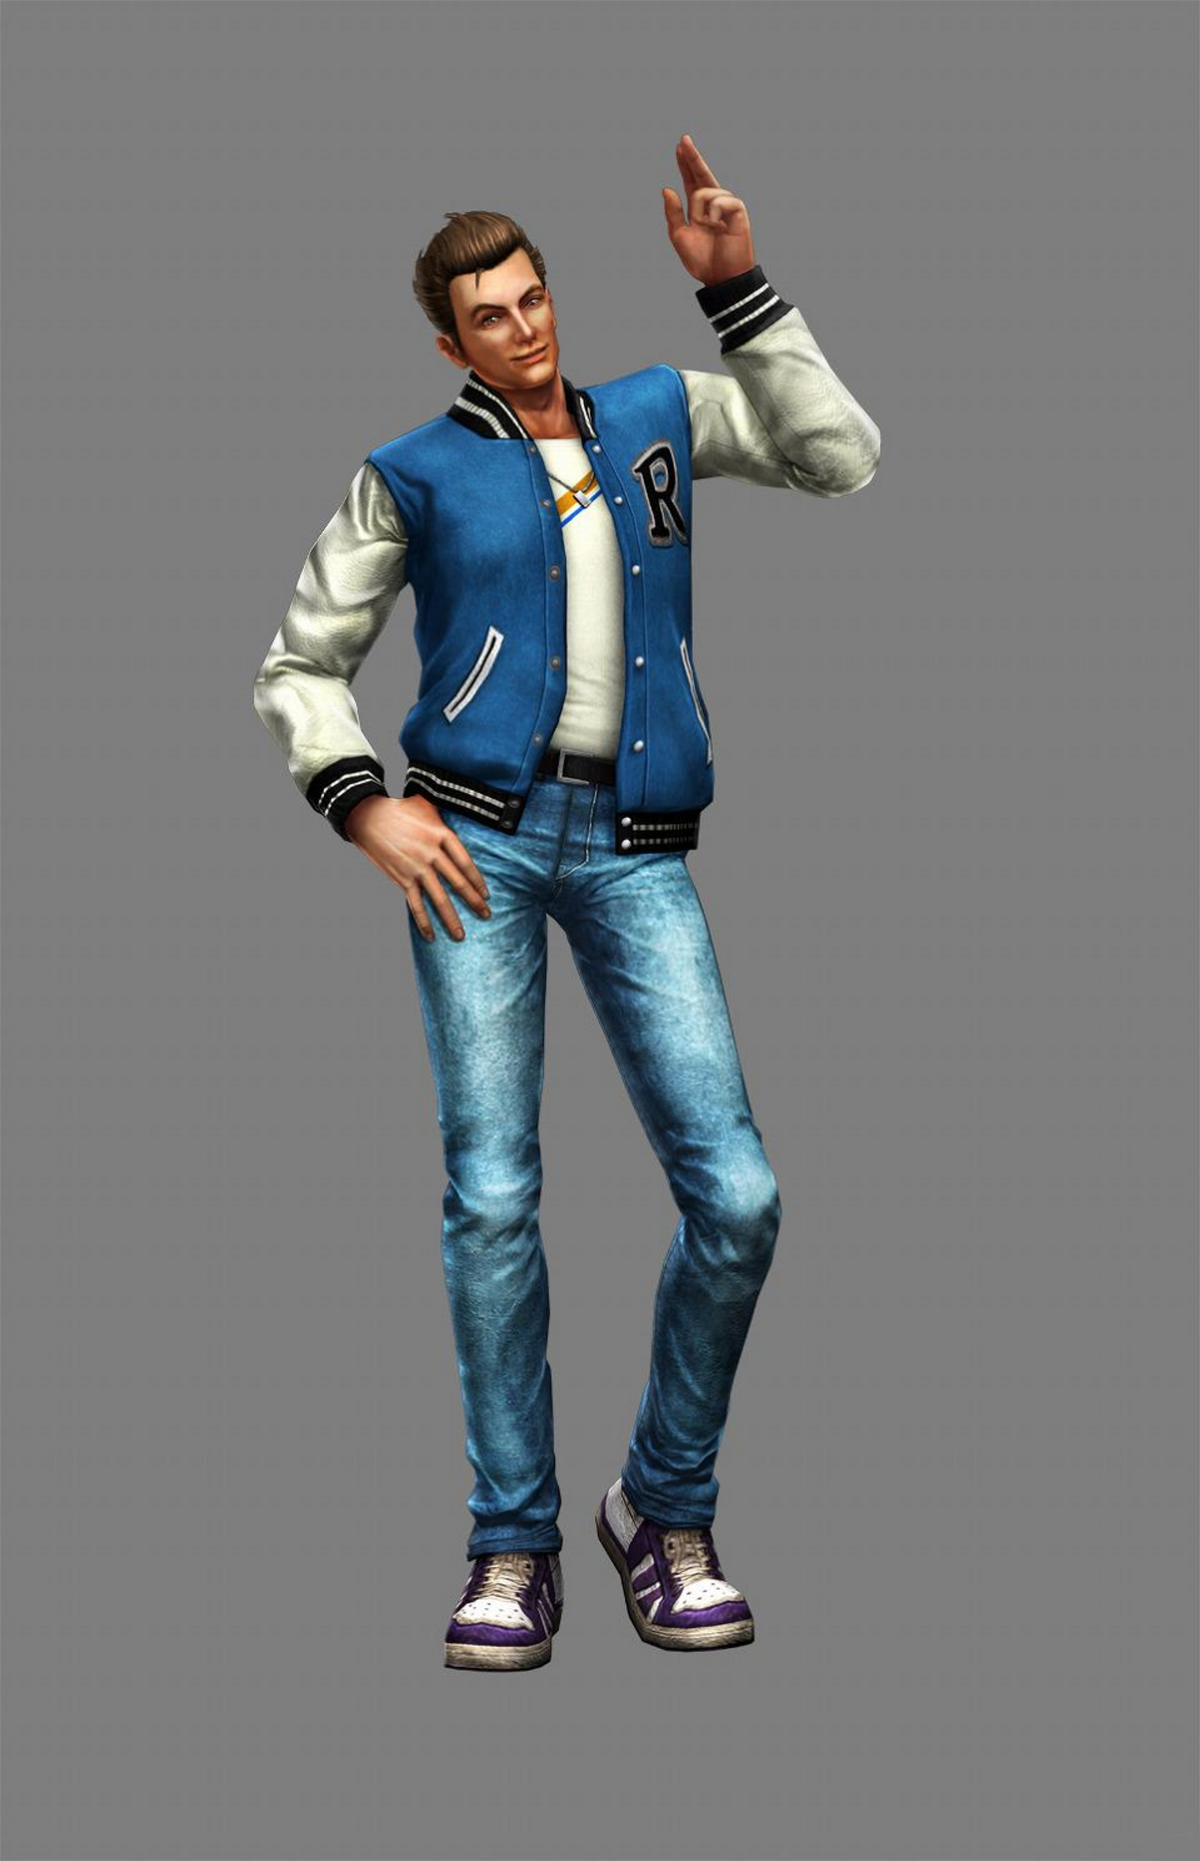 Xbox 360 - Lollipop Chainsaw - Nick Carlyle (Original Body) - The Models  Resource